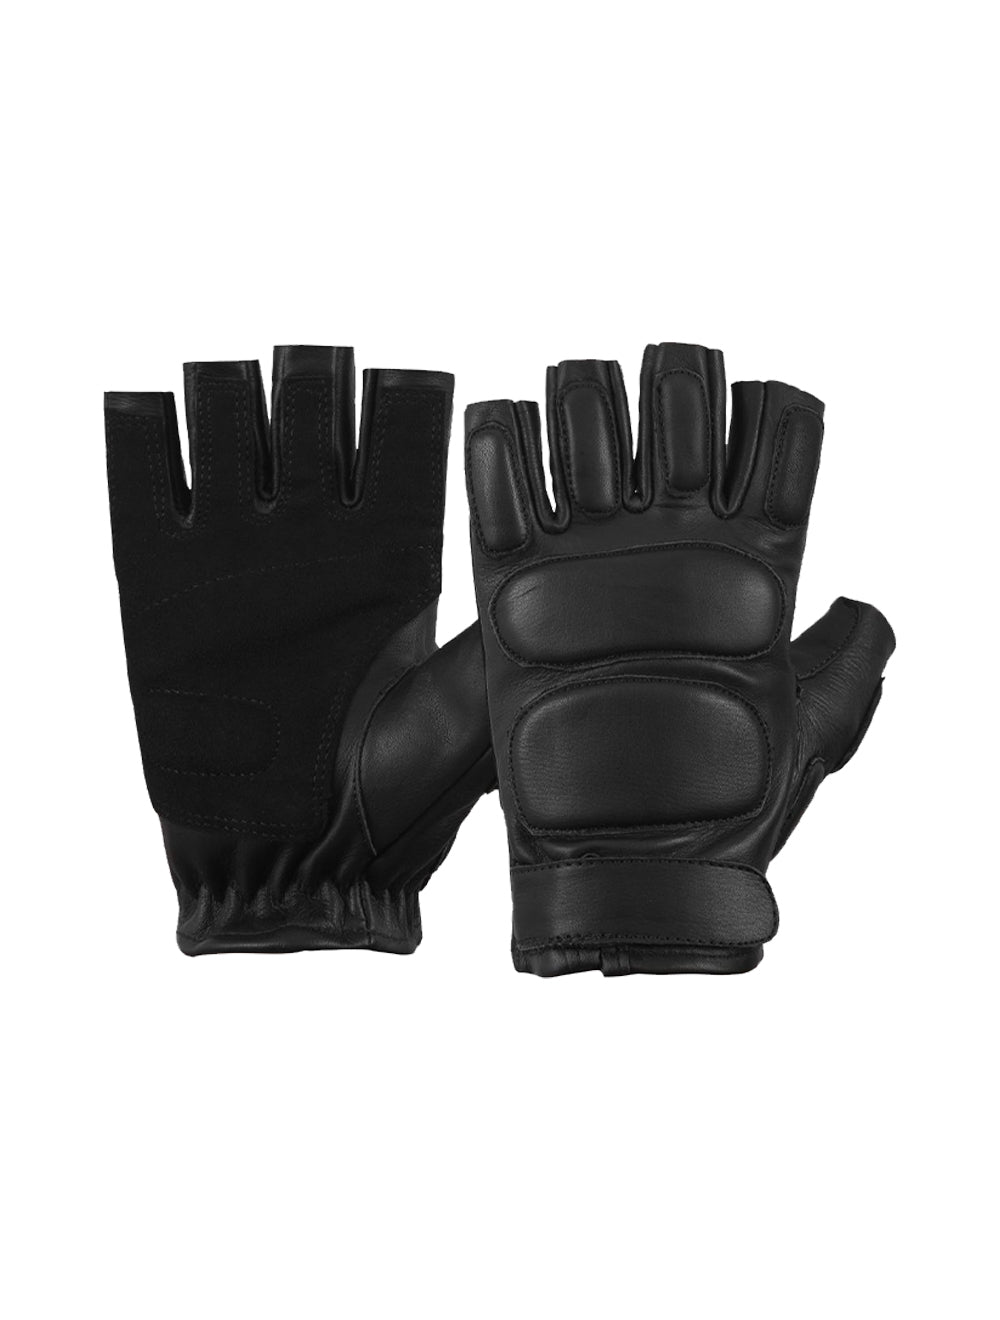 Fingerless Knuckle Protection Gloves